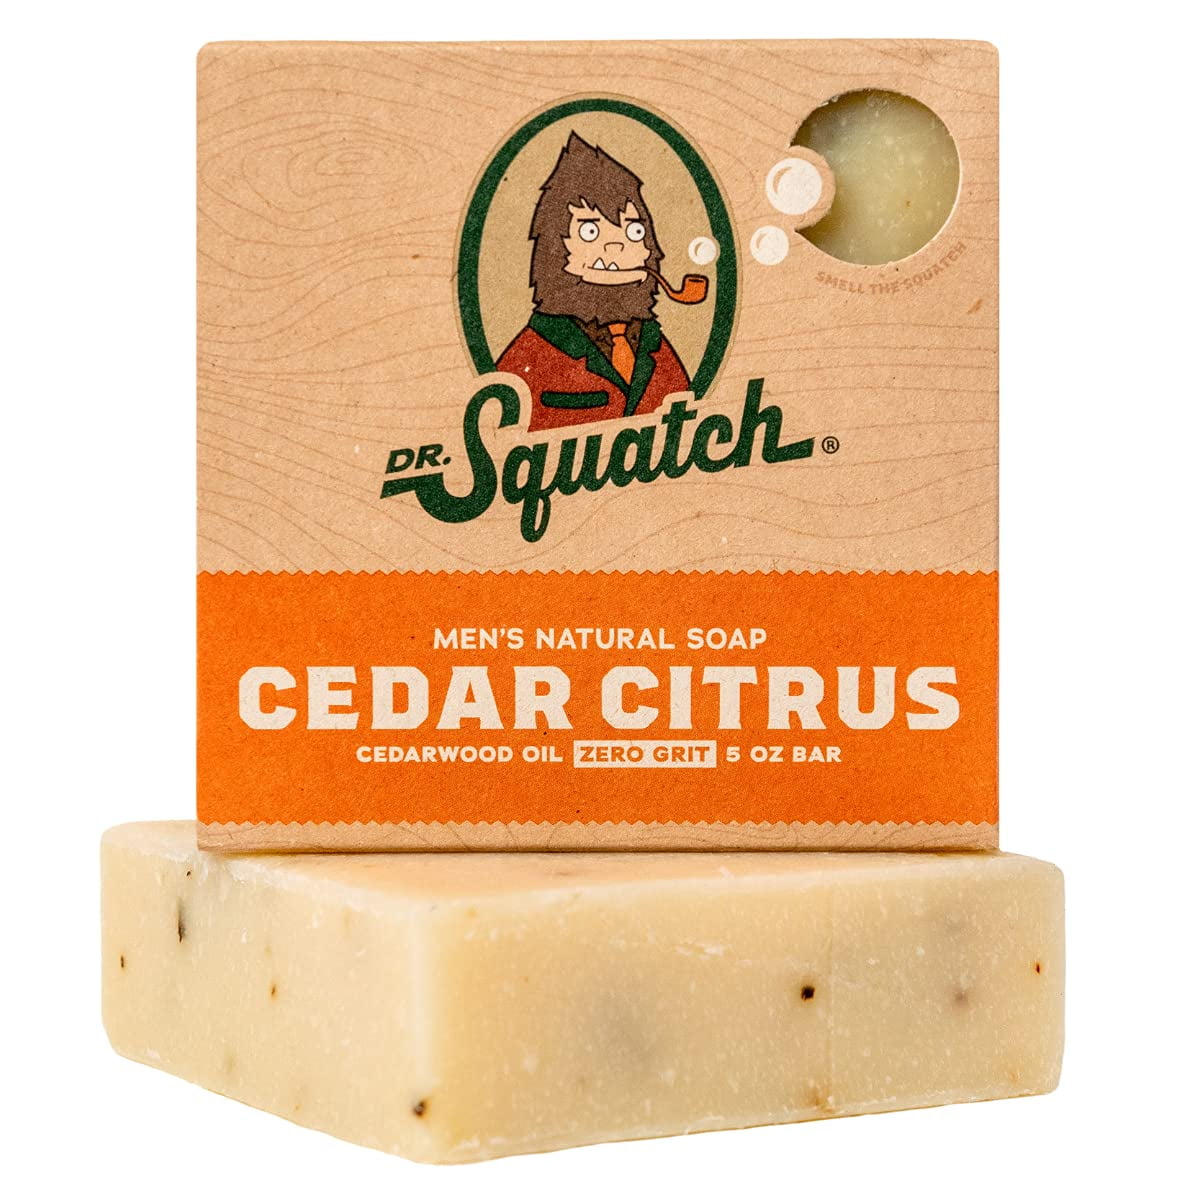 Dr. Squatch Soap – All-Natural Mens Soap w/ Natural Scents, Handmade in USA